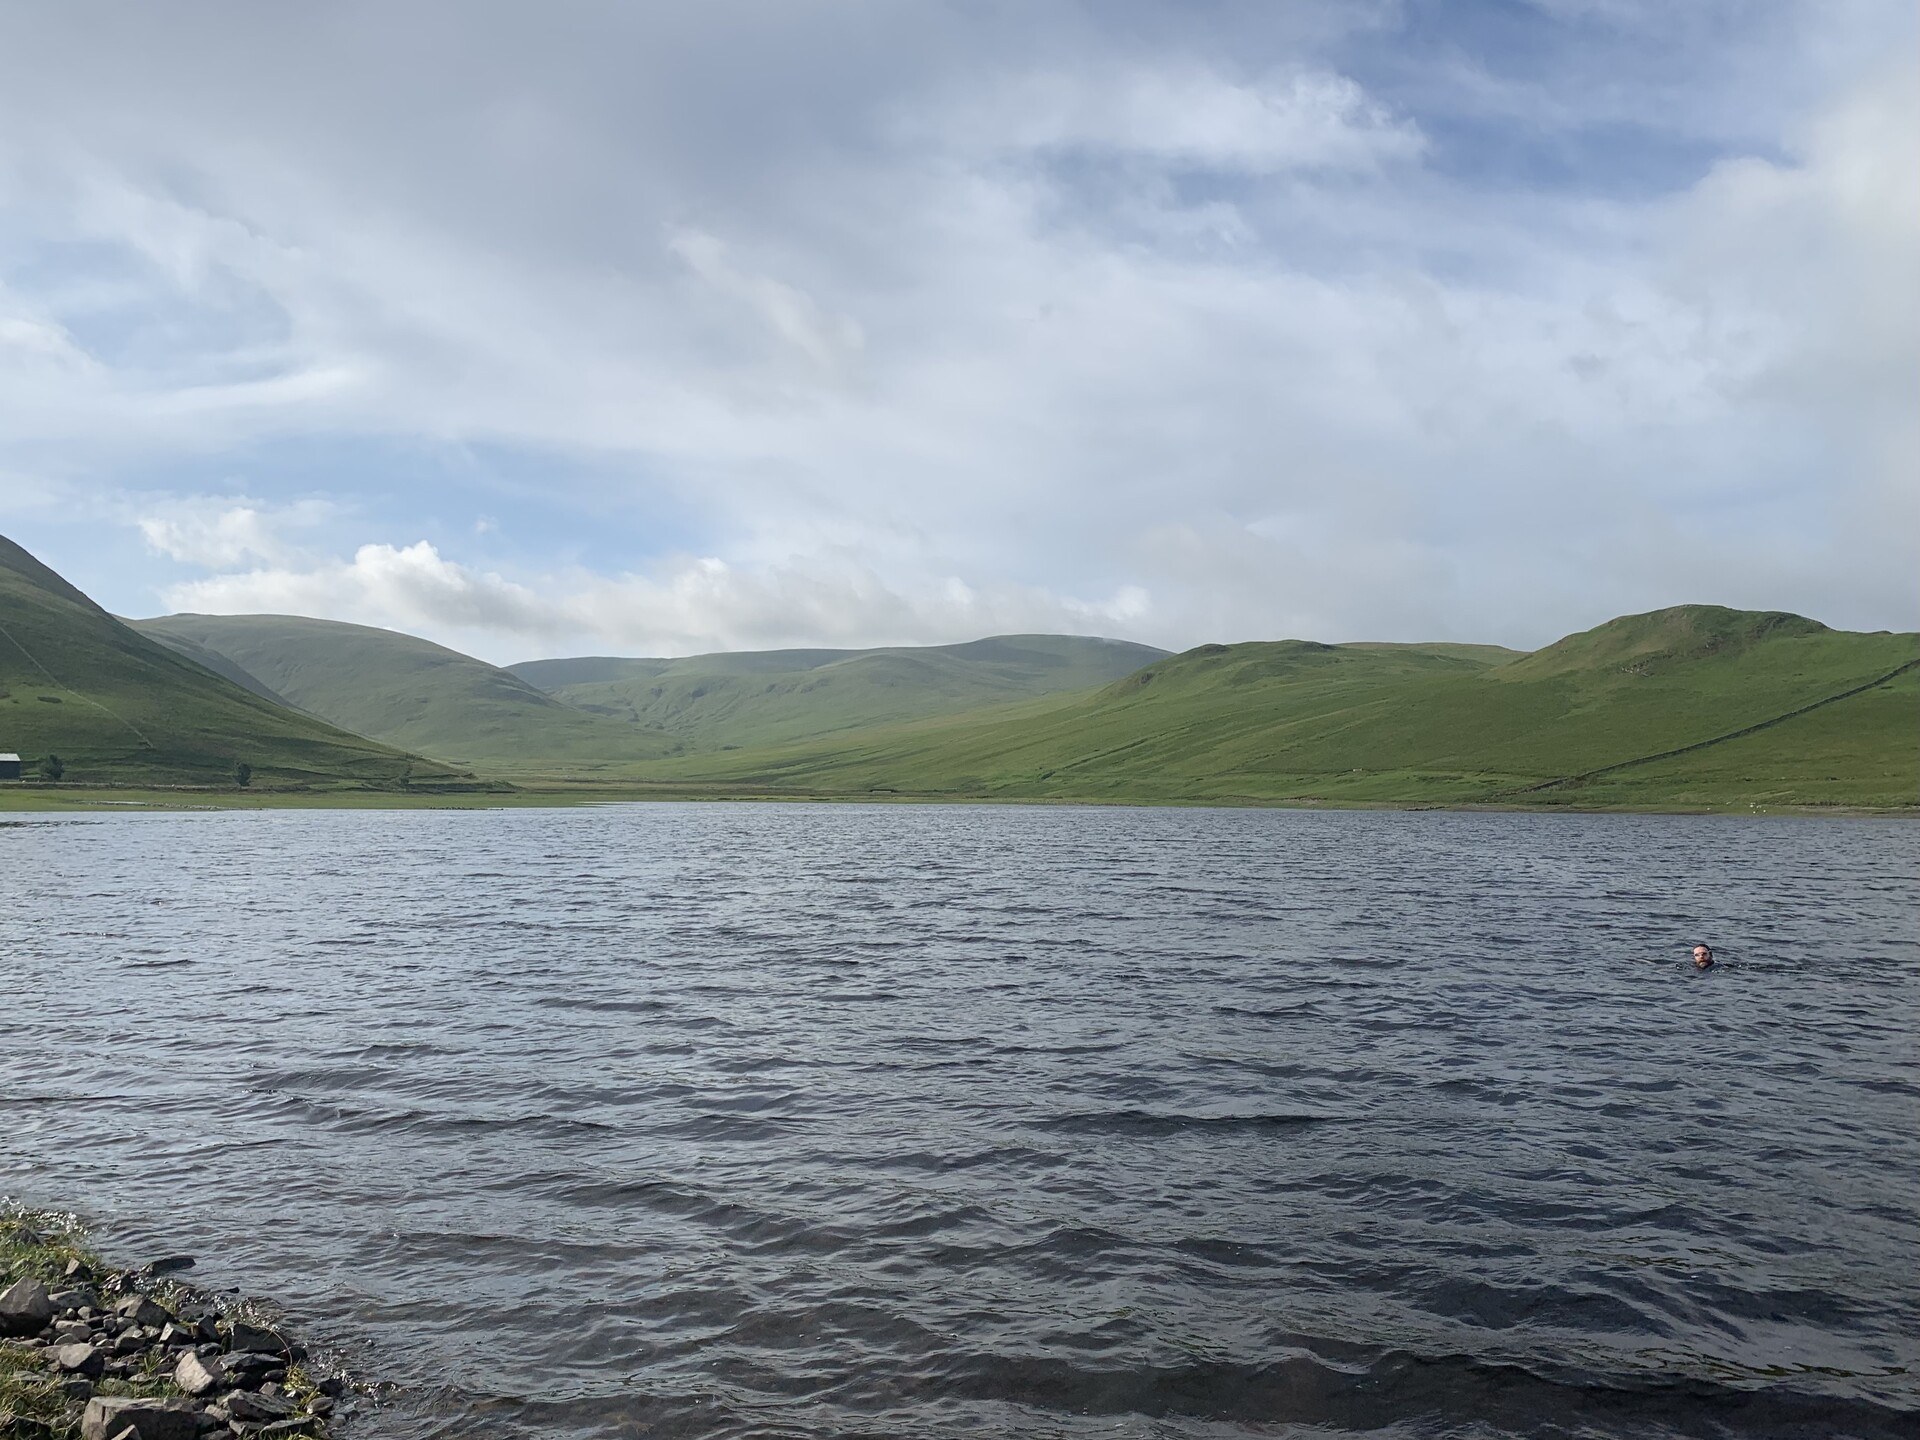 The cold, shallow waves of Fruid Reservoir, with the green slopes of the hills in the background